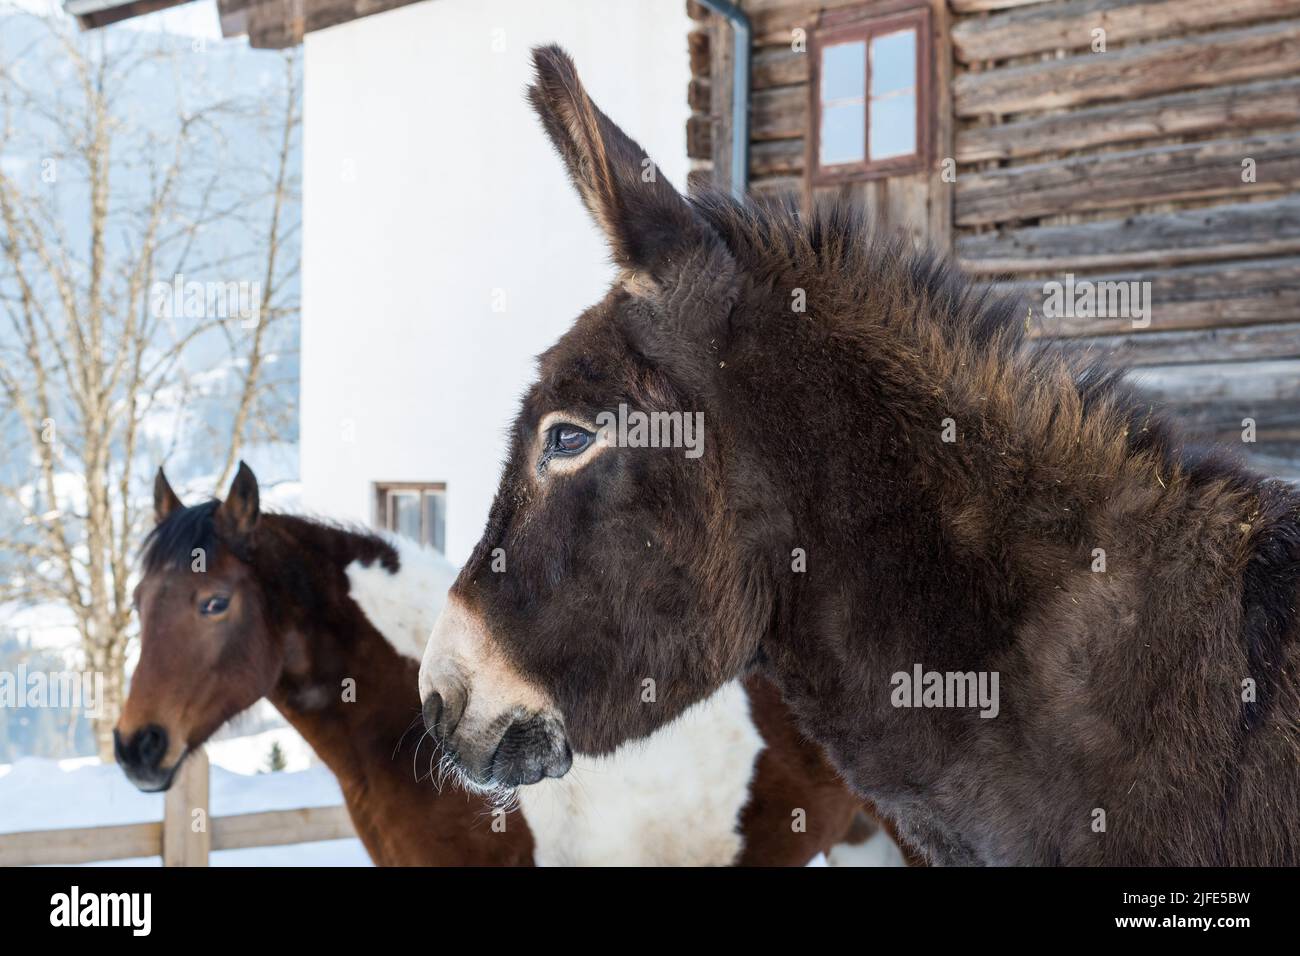 A donkey and a horse, Leogang, Austria Stock Photo